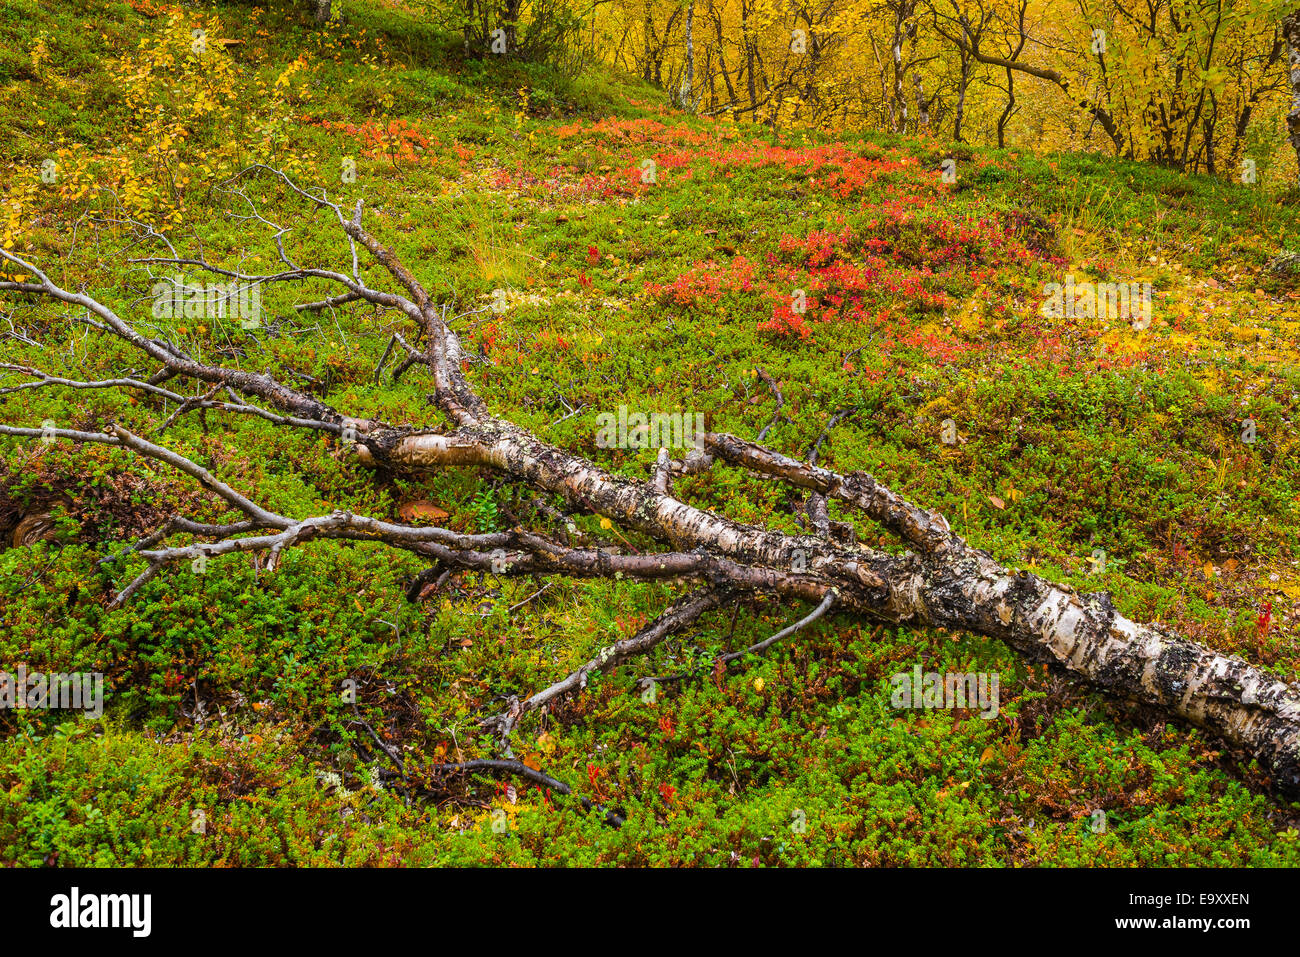 Dead tree in autumnal forest Stock Photo